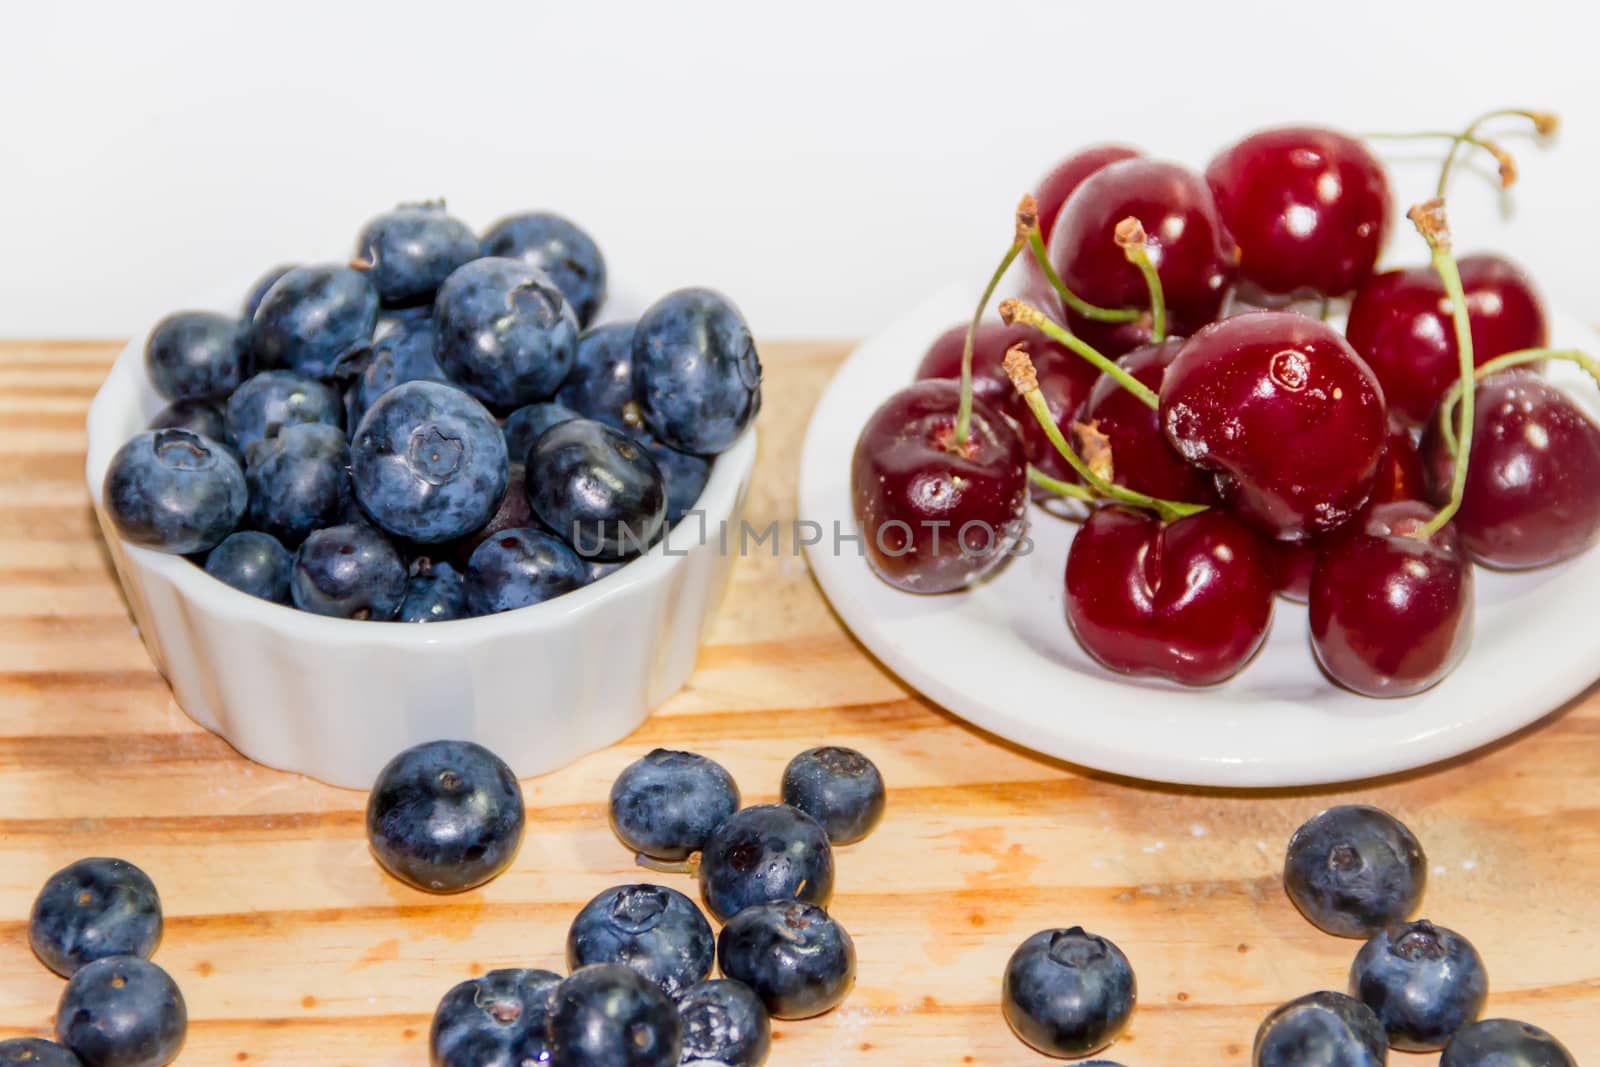 red fruits with rustic wood background by GabrielaBertolini